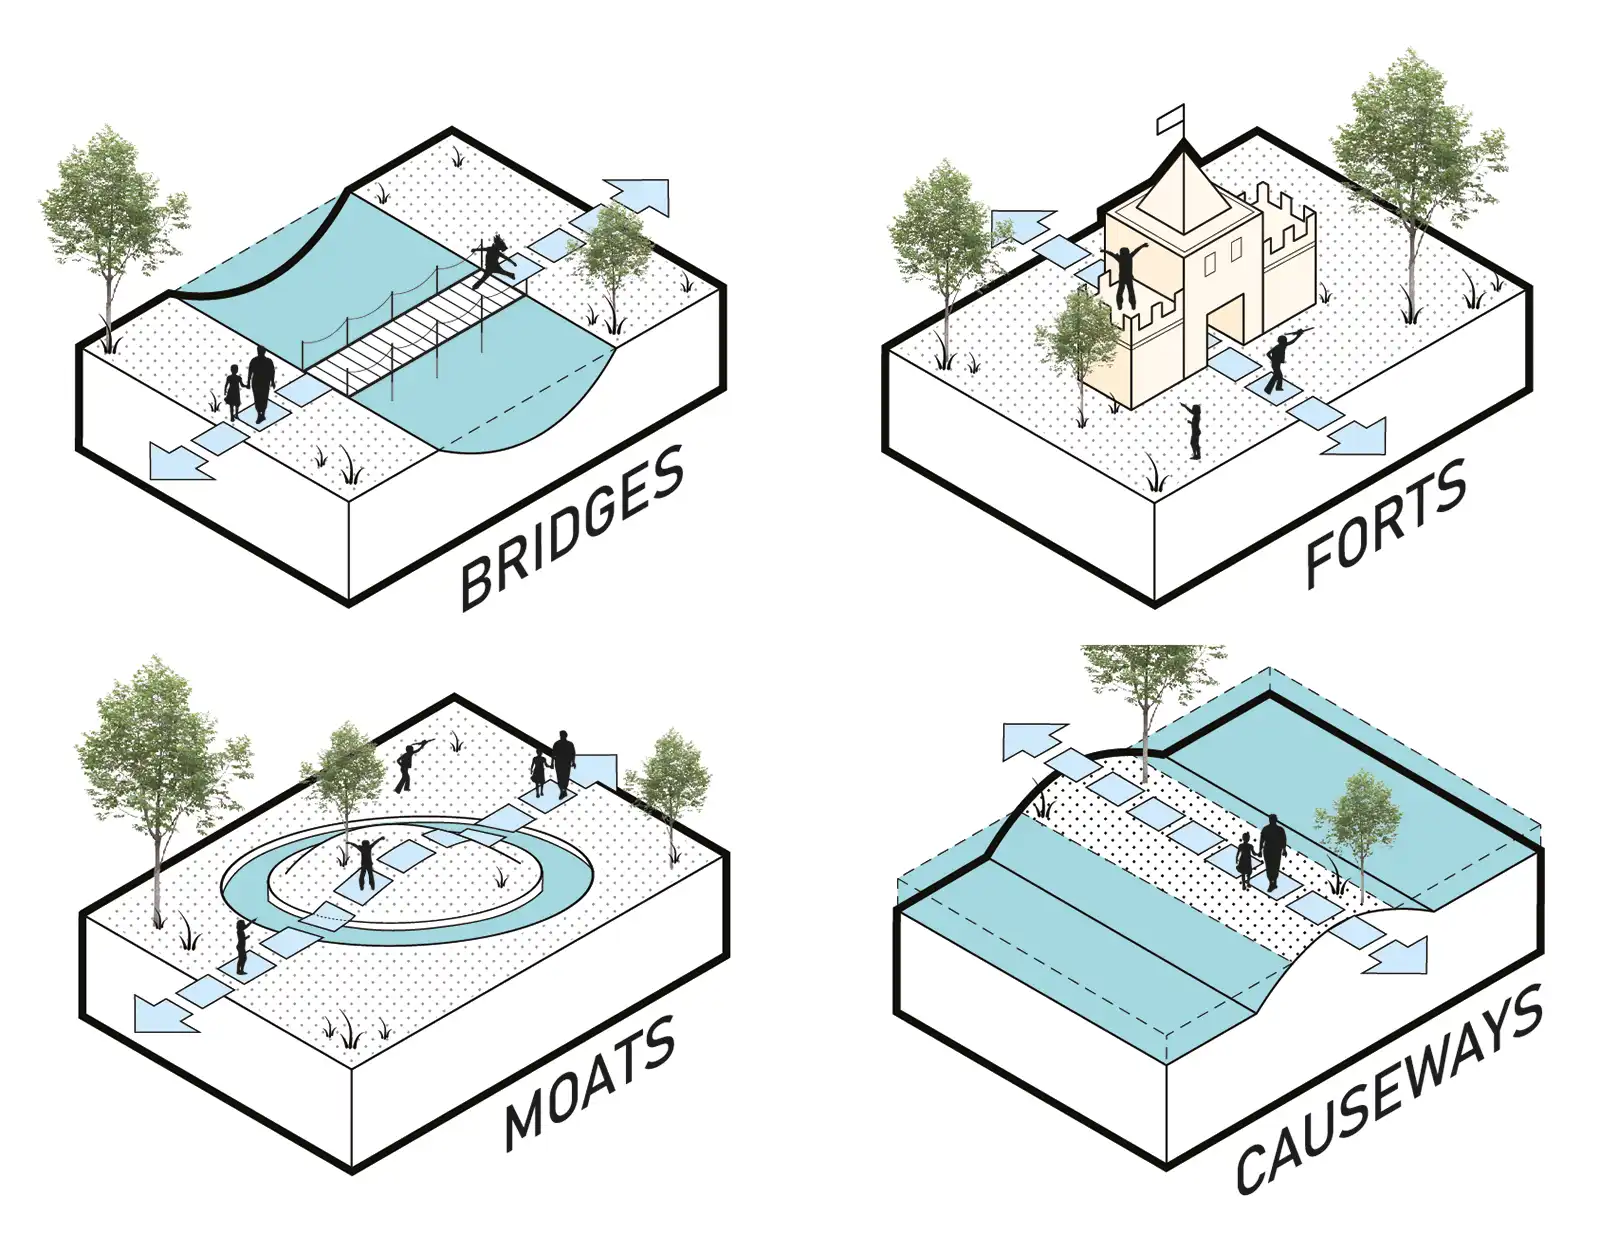 Diagram of play typologies, showing bridges, moats and causeways